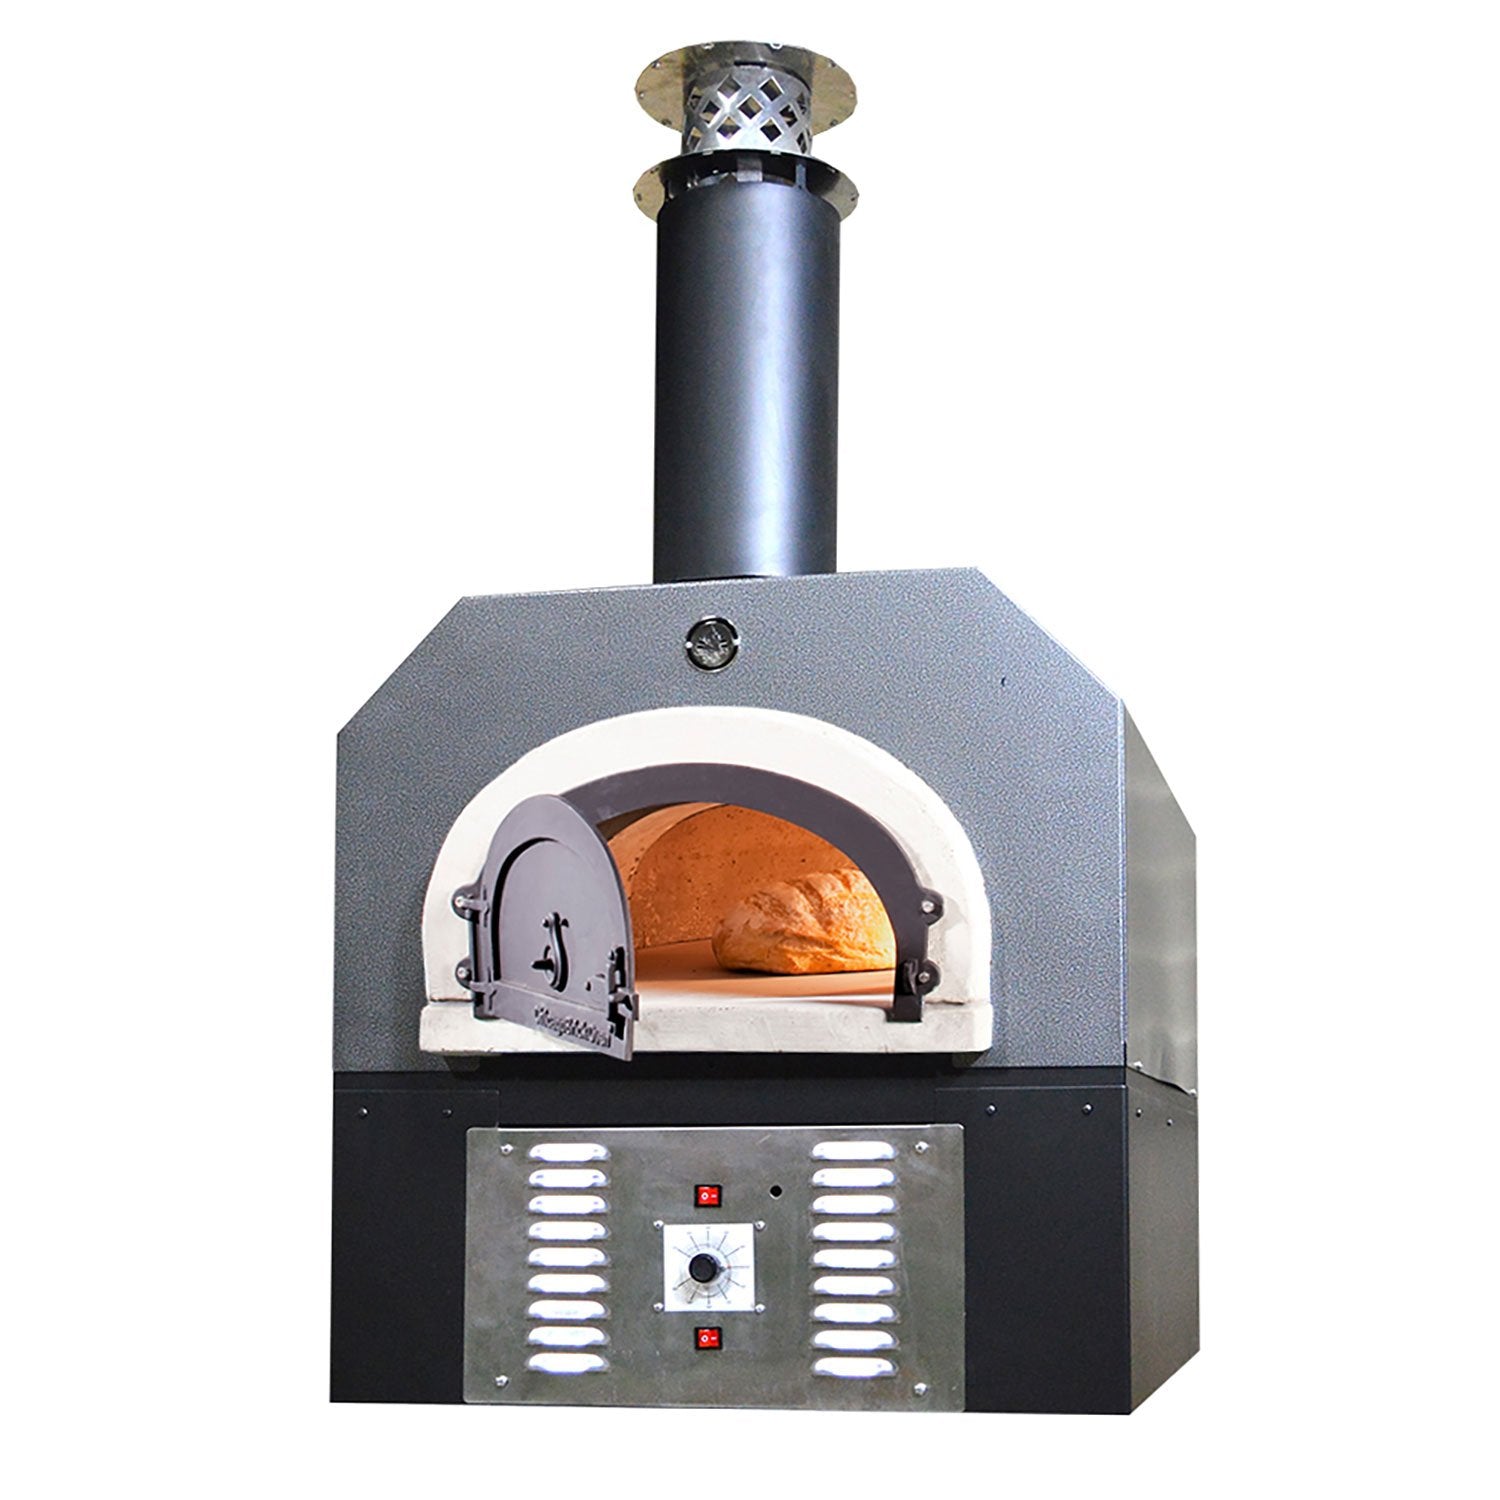 Chicago Brick OvenChicago Brick Oven 750 Hybrid Gas and Wood Dual Fuel Residential Countertop Pizza Oven CBO-O-CT-750-HYB-NG-SV-R-3K-SKT- BetterPatio.com